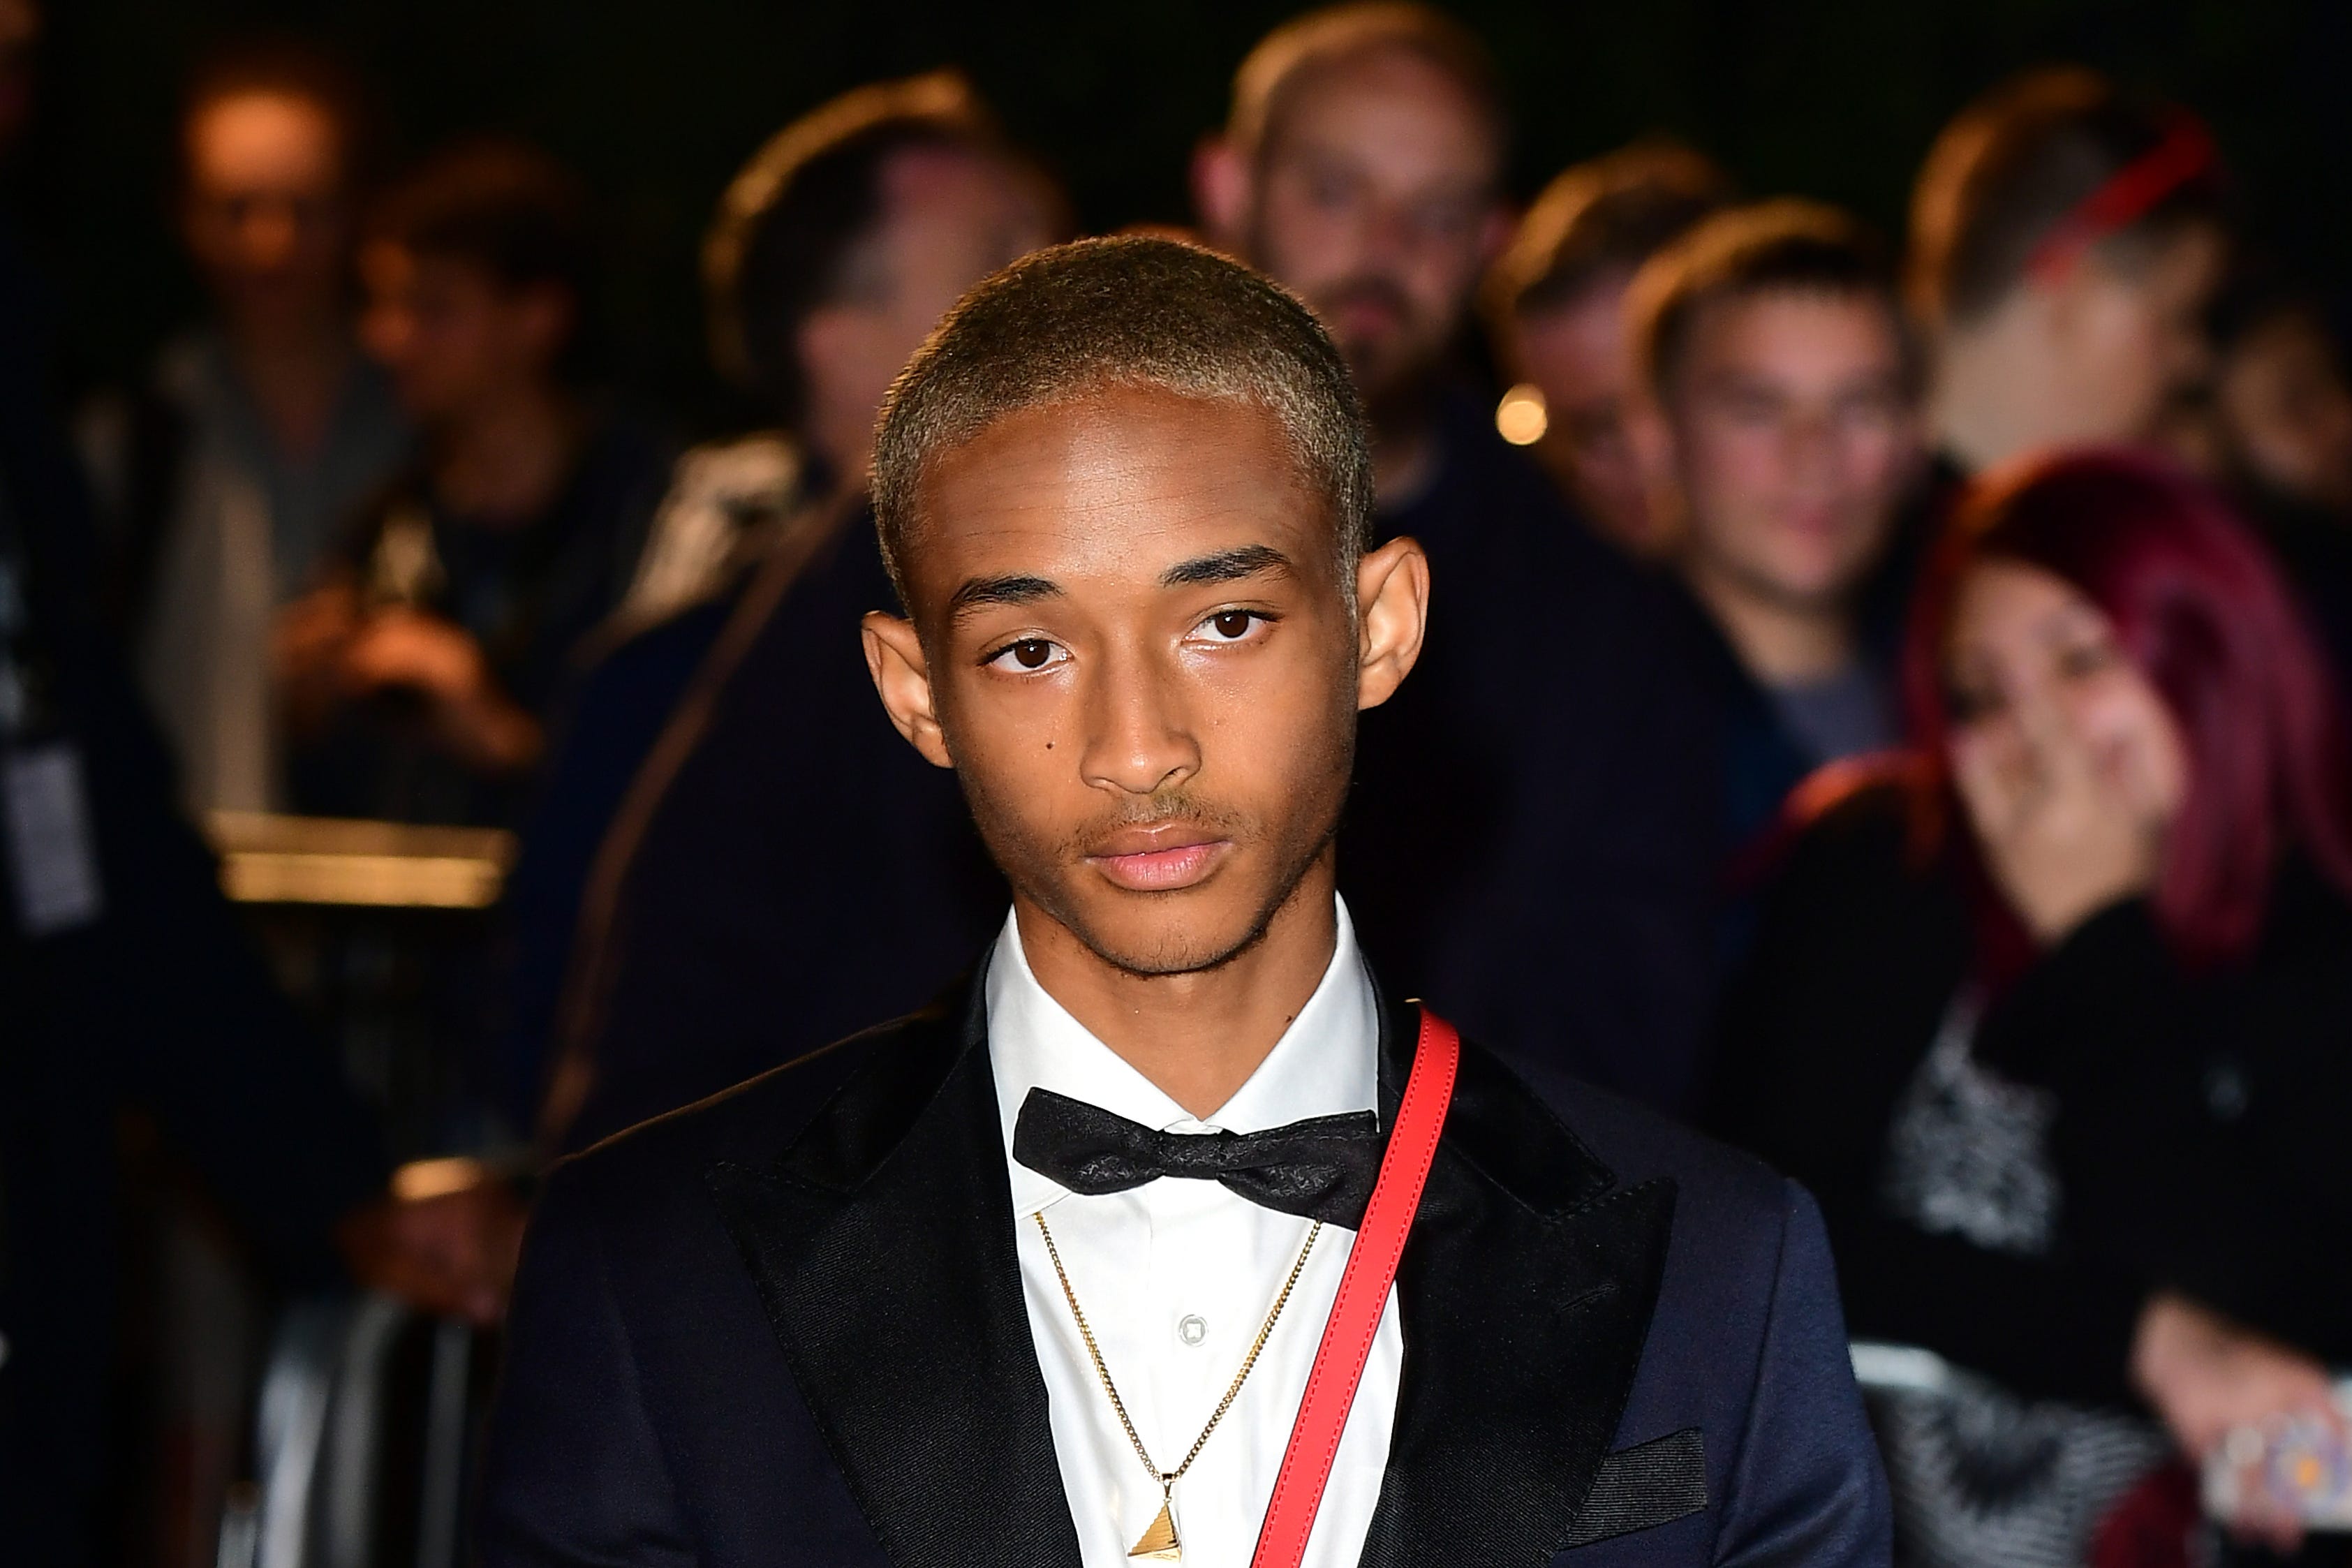 Jaden Smith said he hopes to collaborate with Greta Thunberg because he is inspired by her ‘passion’ and ‘fearlessness’ when campaigning for environmental issues (PA)